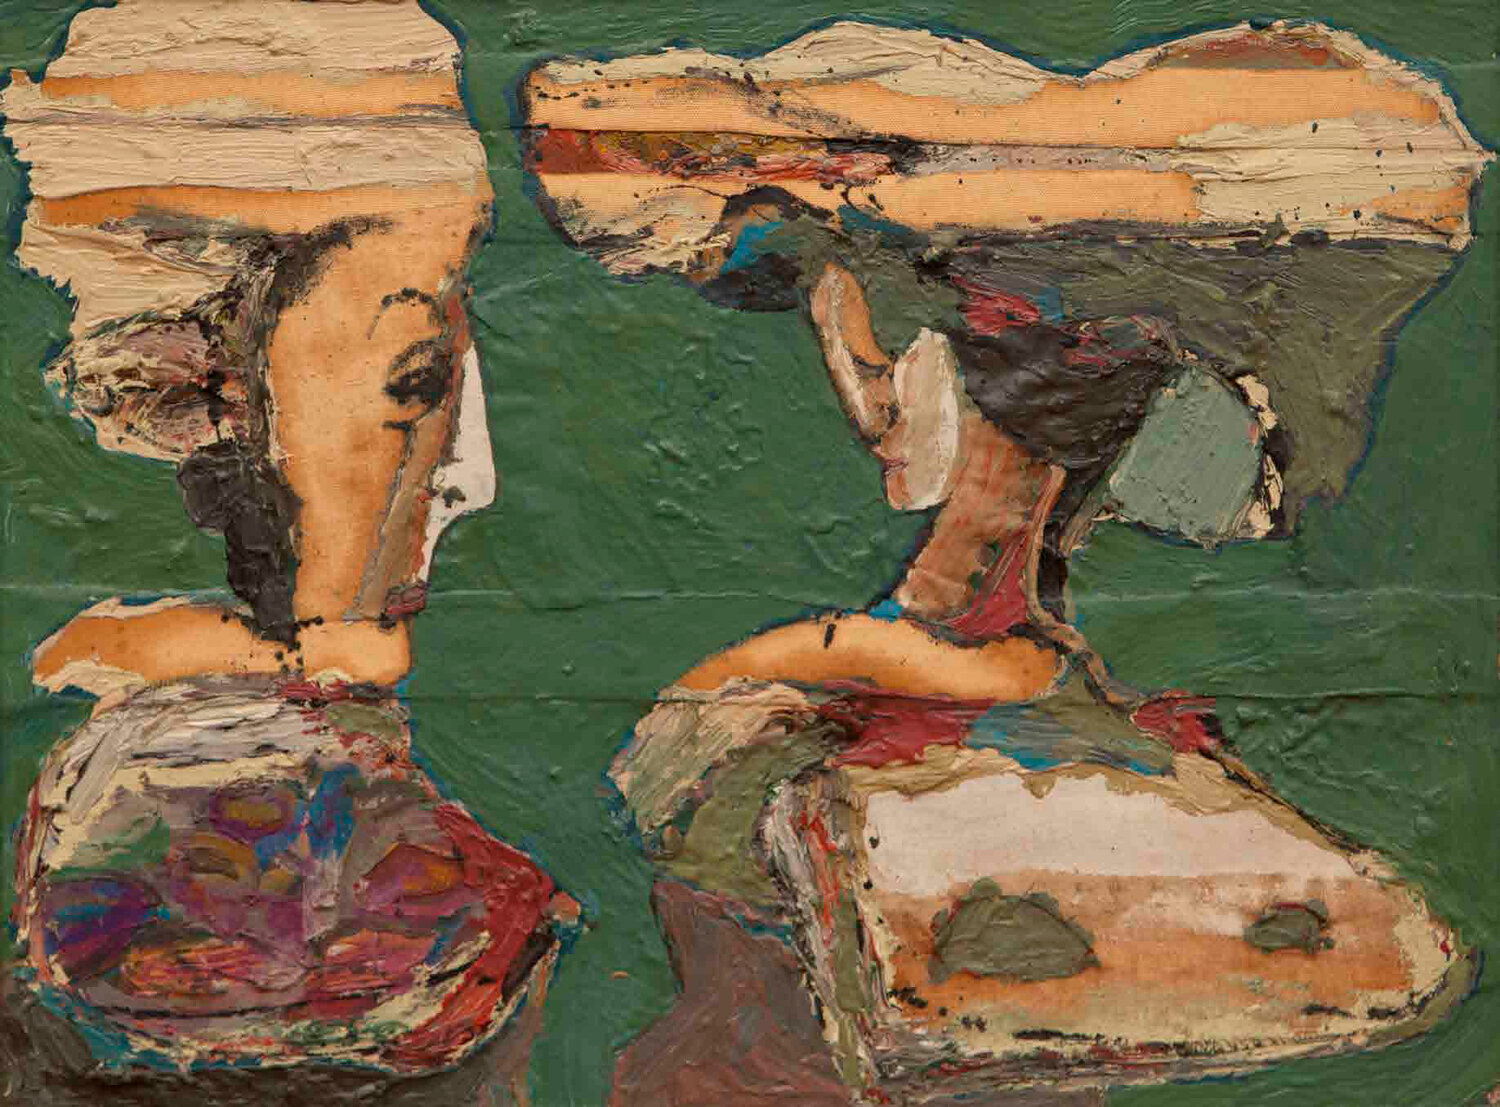 Benny Andrews’ Chasty, 1961, is a mixed media, oil and collage on canvas, represents a playful portrait. A gift to the museum by Dr. and Mrs. Joseph Tucker.